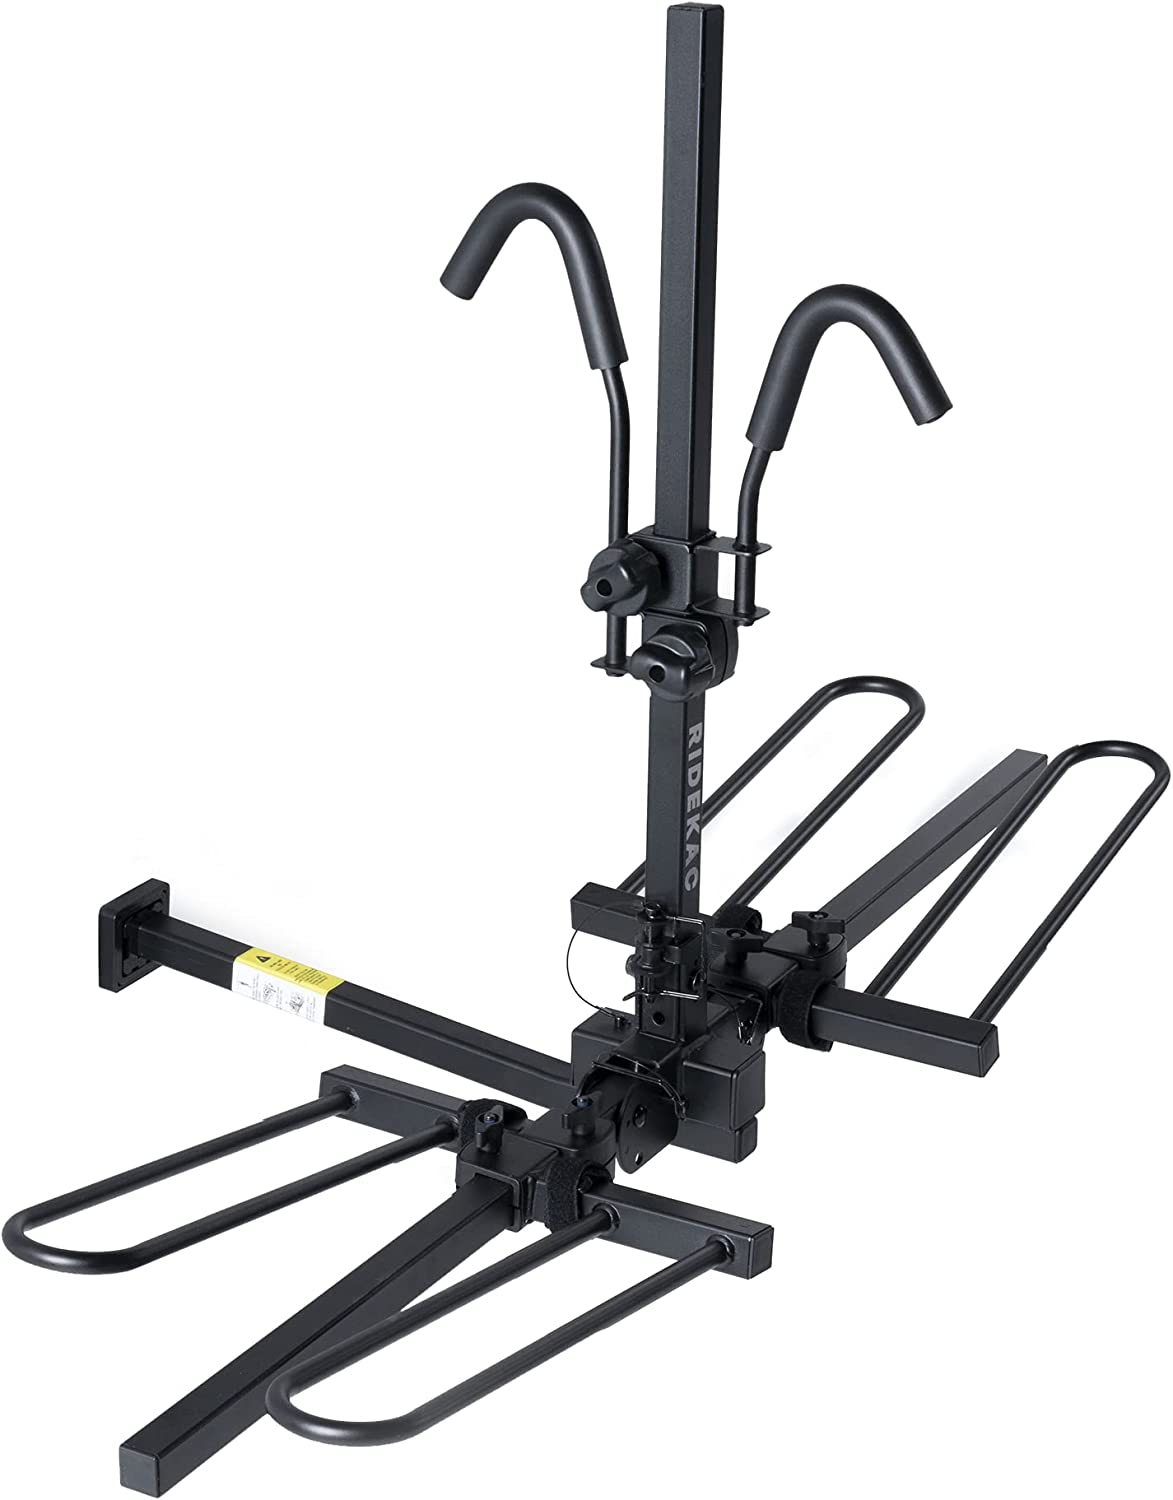 KAC E2 1.25″ and 2″ Hitch Mounted Rack 2-Bike Platform Style Carrier for Standard and Fat Tire Bicycles – 2 Bikes X 30 lbs (60 lbs Total) Heavy Weight Capacity – Hitch Adapter Included